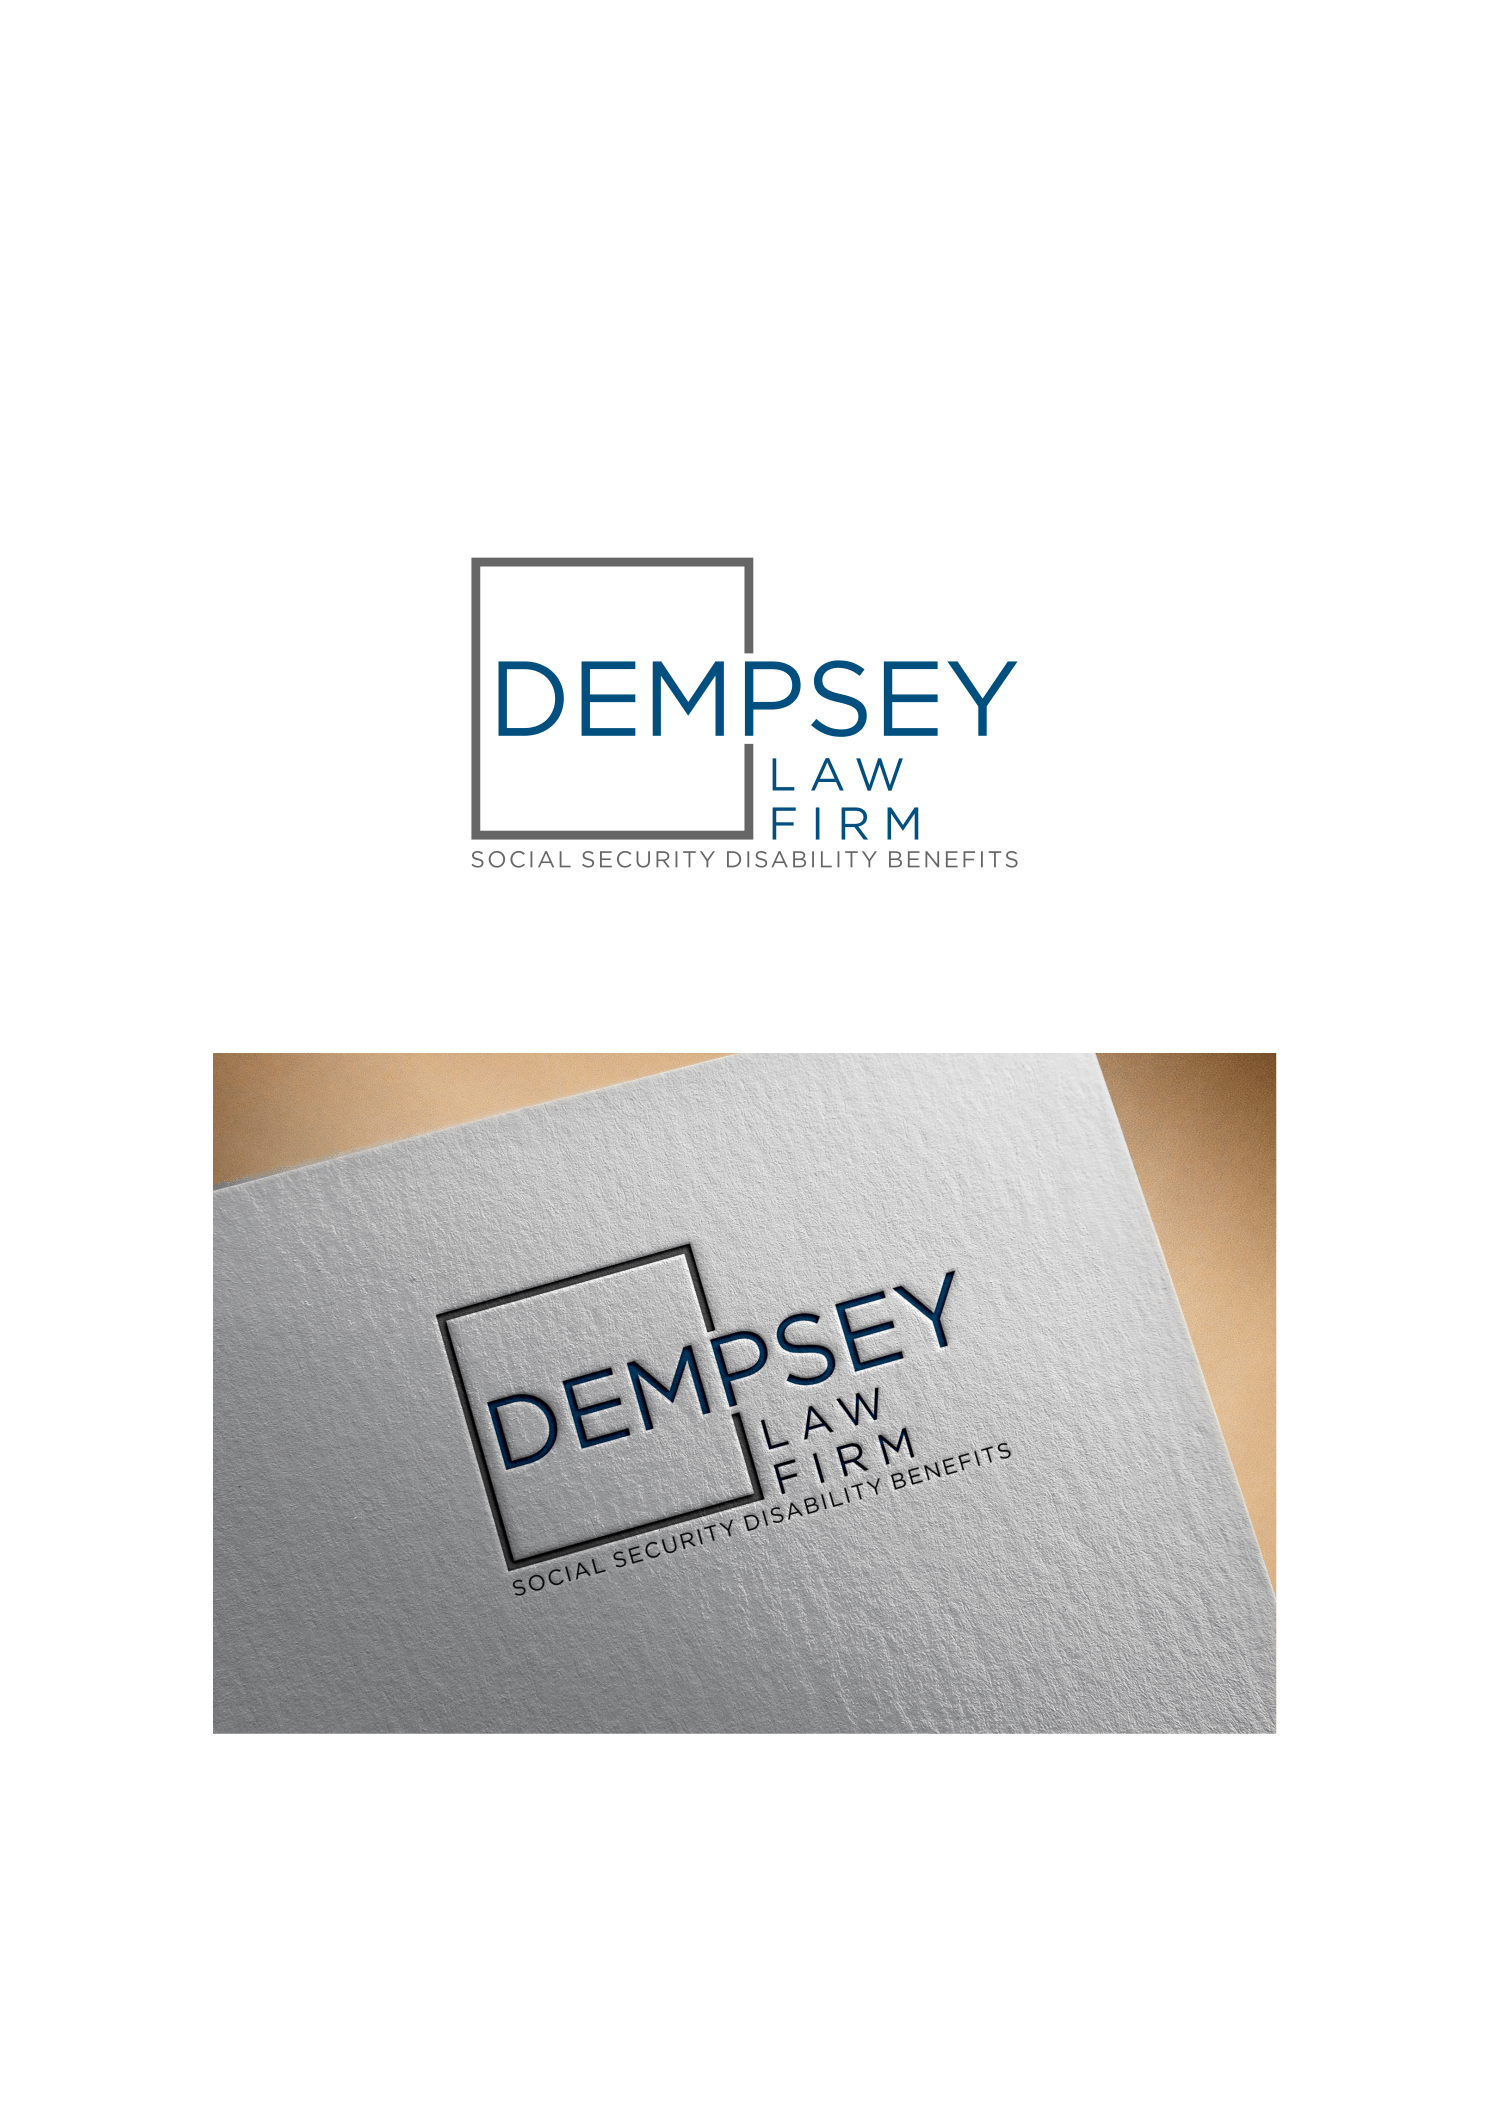 Generic Square Logo - Generic & overused logo designs sold LAW FIRM. Logotype